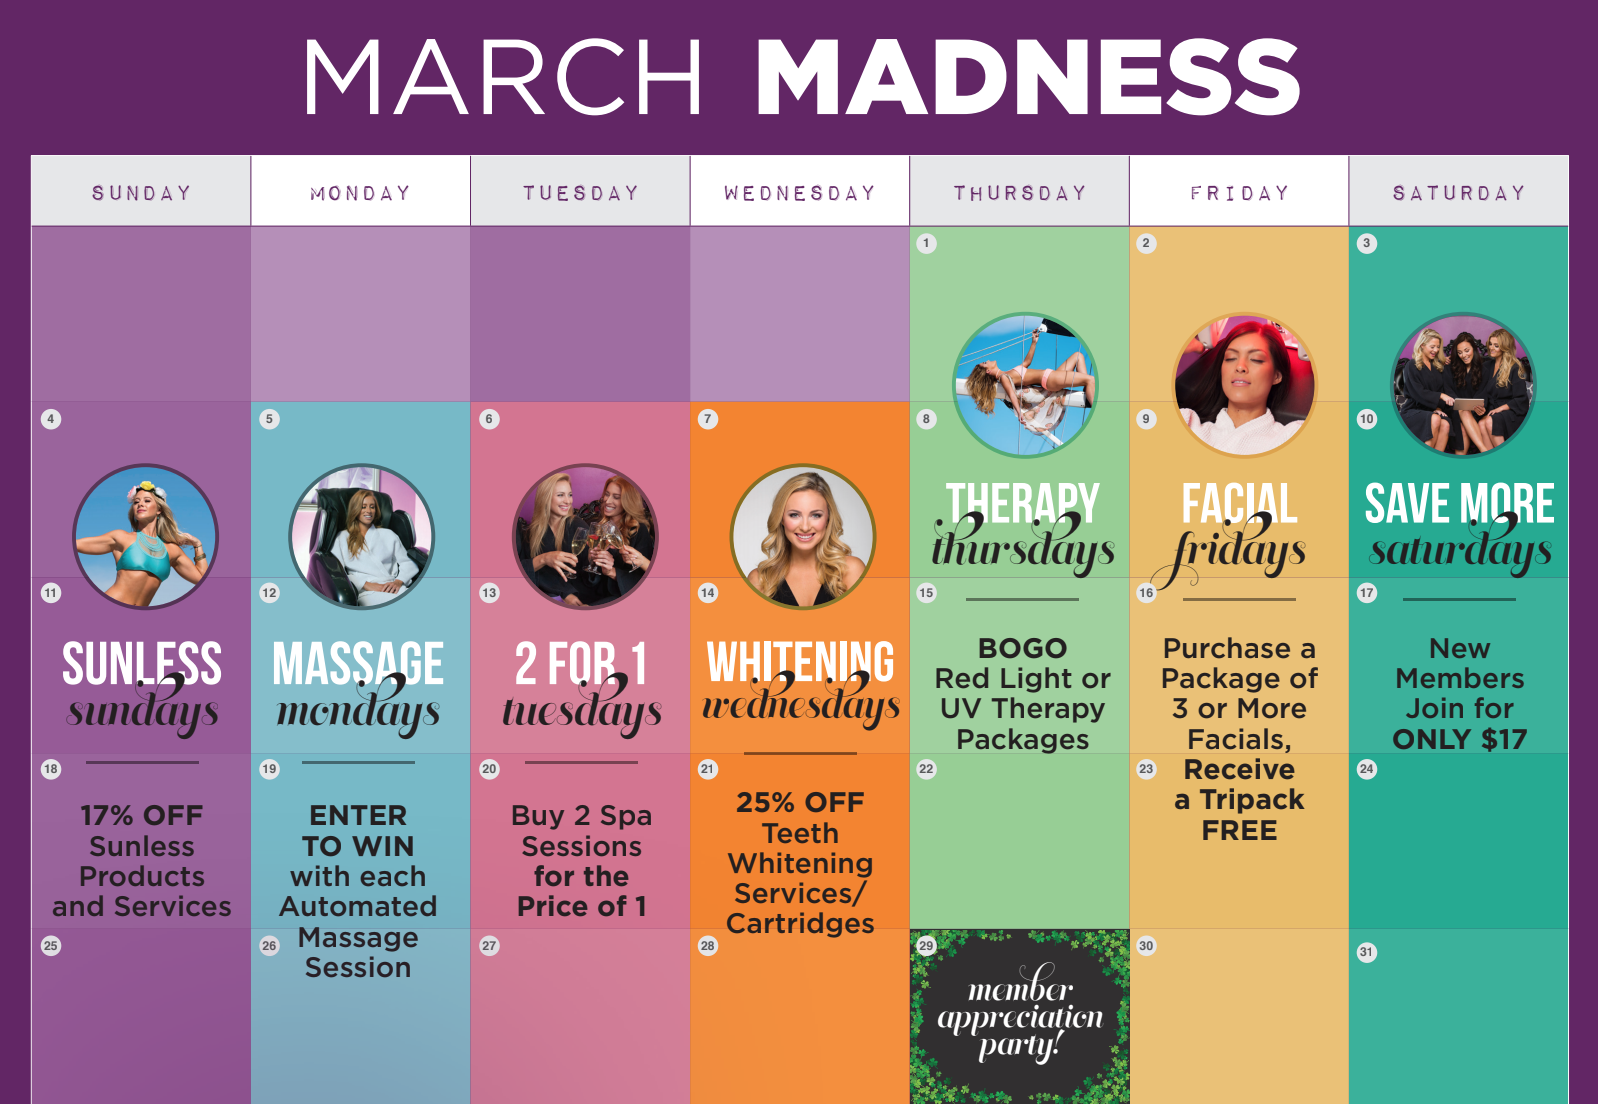 It’s March Madness at Planet Beach